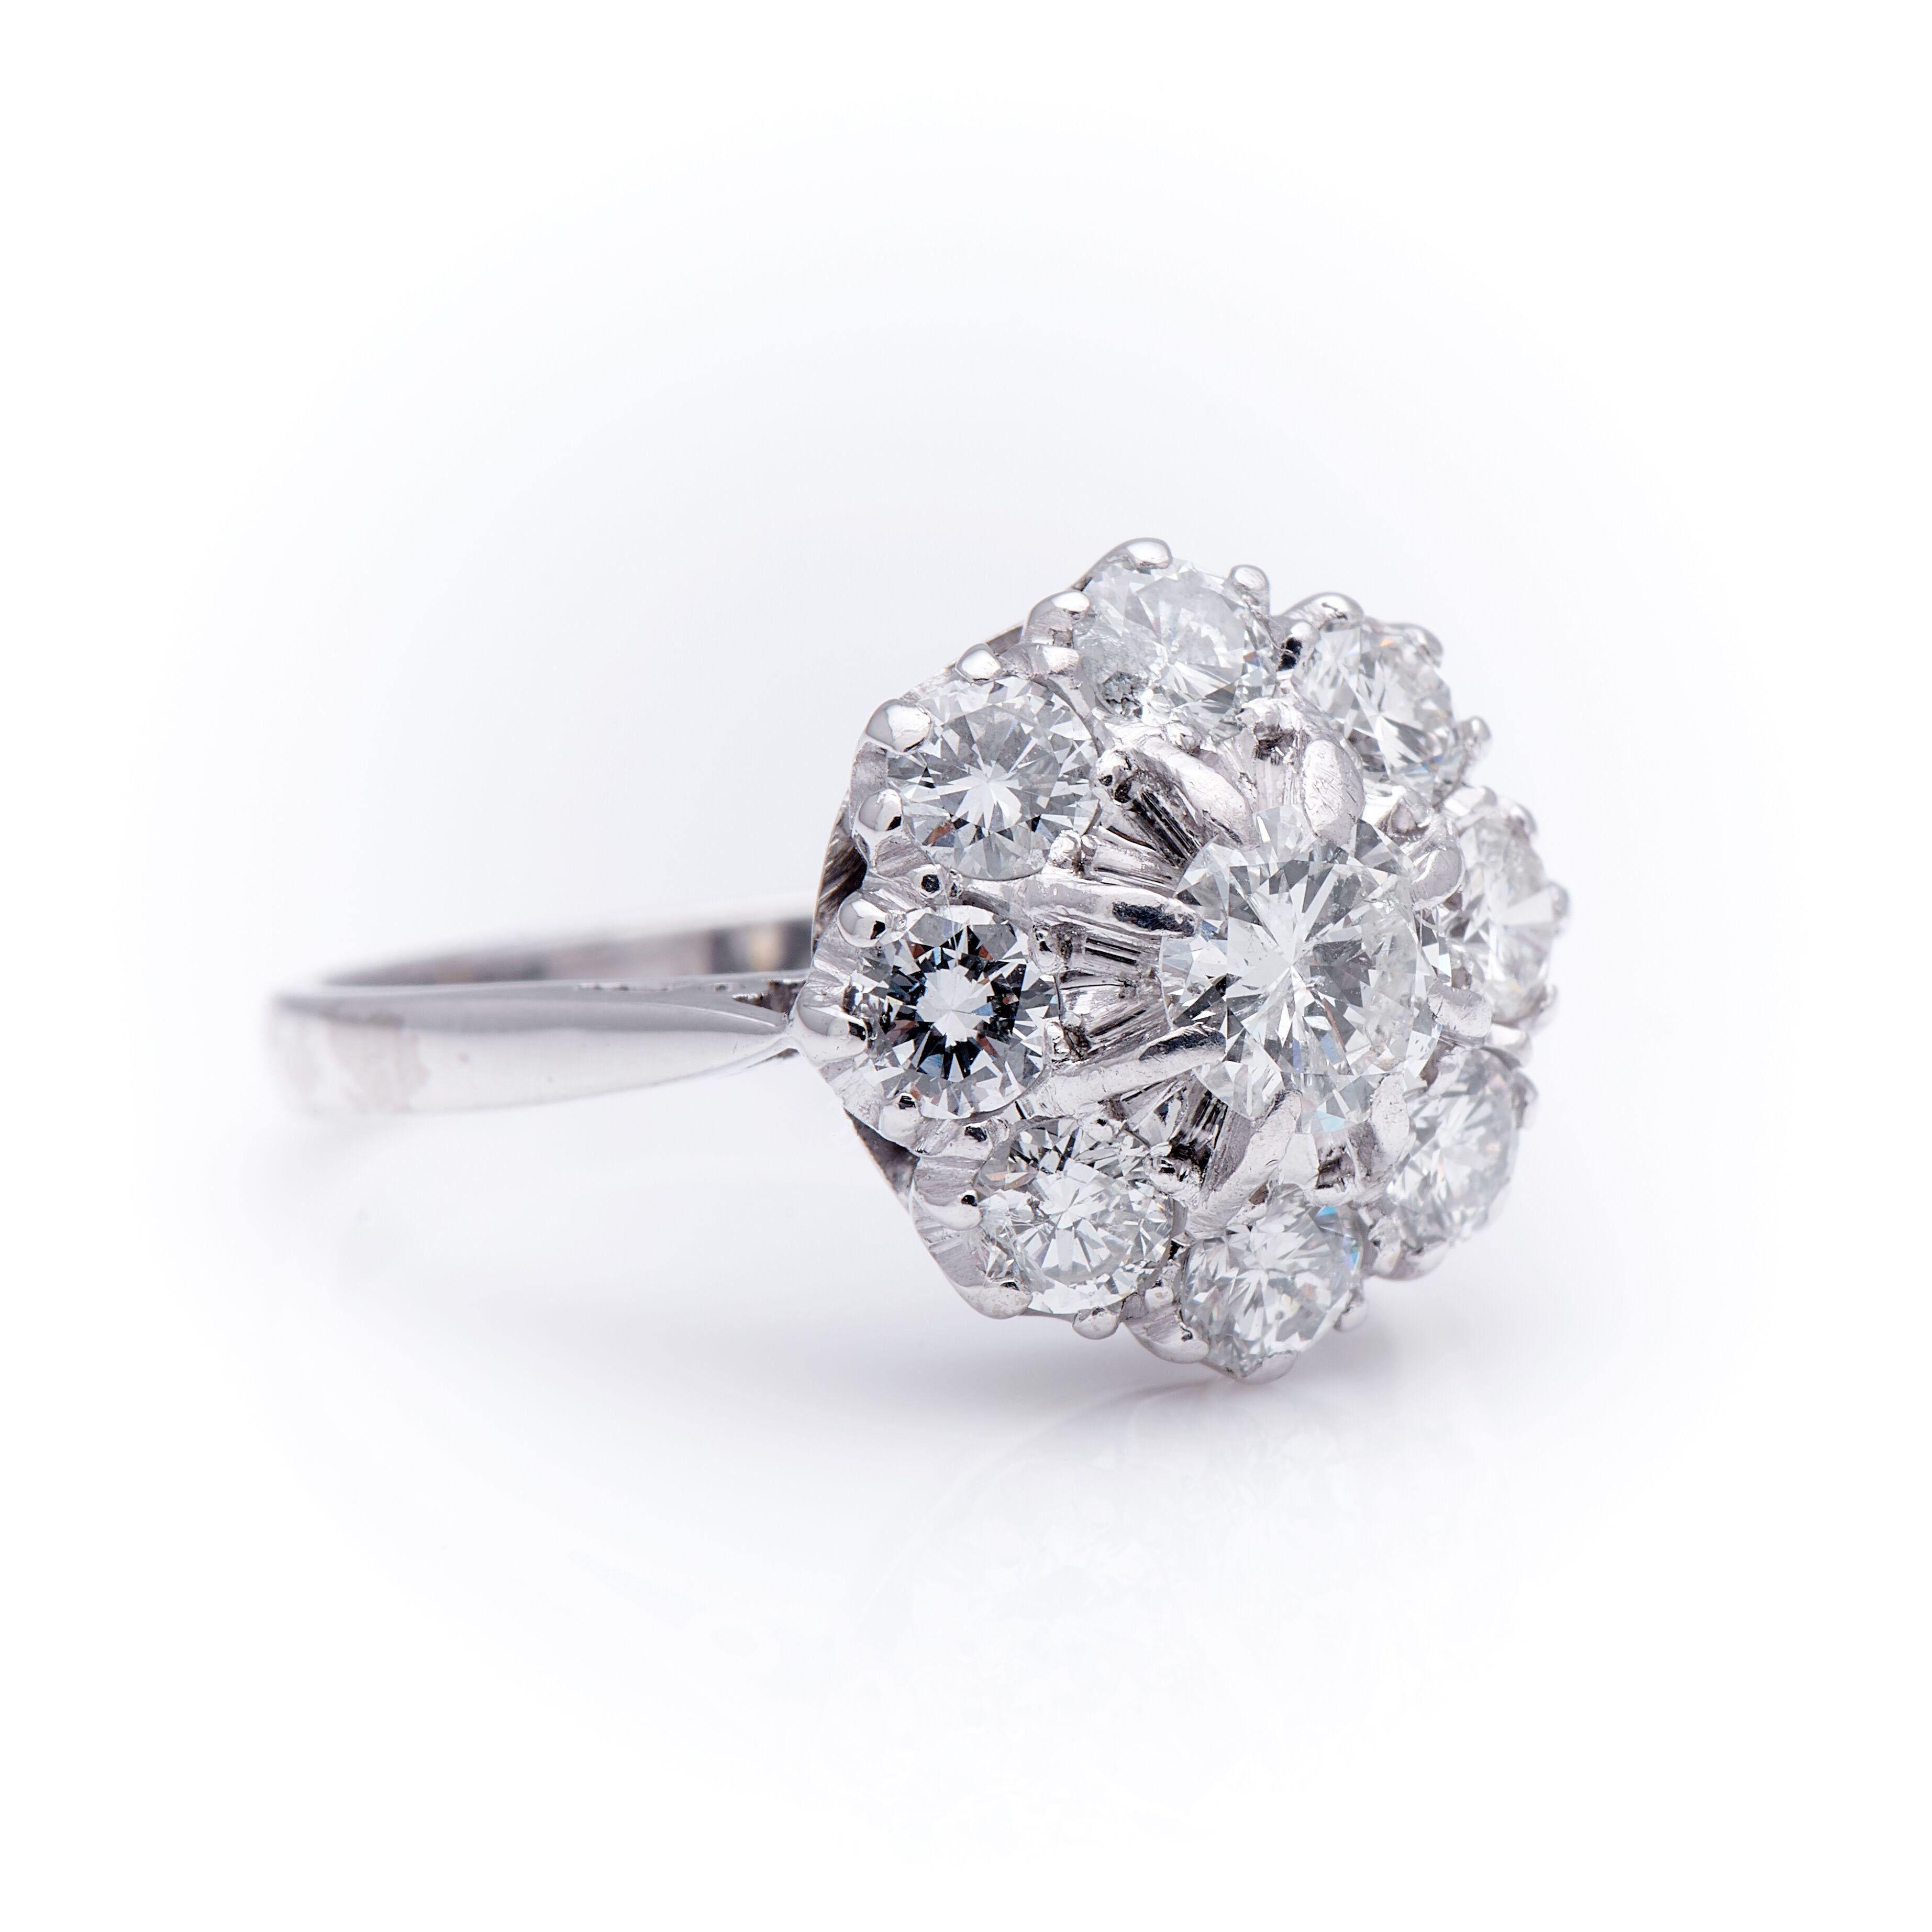 Art Deco, diamond cluster ring, circa 1920. An absolutely stunning ring set with nine beautifully white diamonds (comfortably over 1ct total) of excellent clarity. Set to centre a larger old transitional-cut diamond with a boarder of smaller